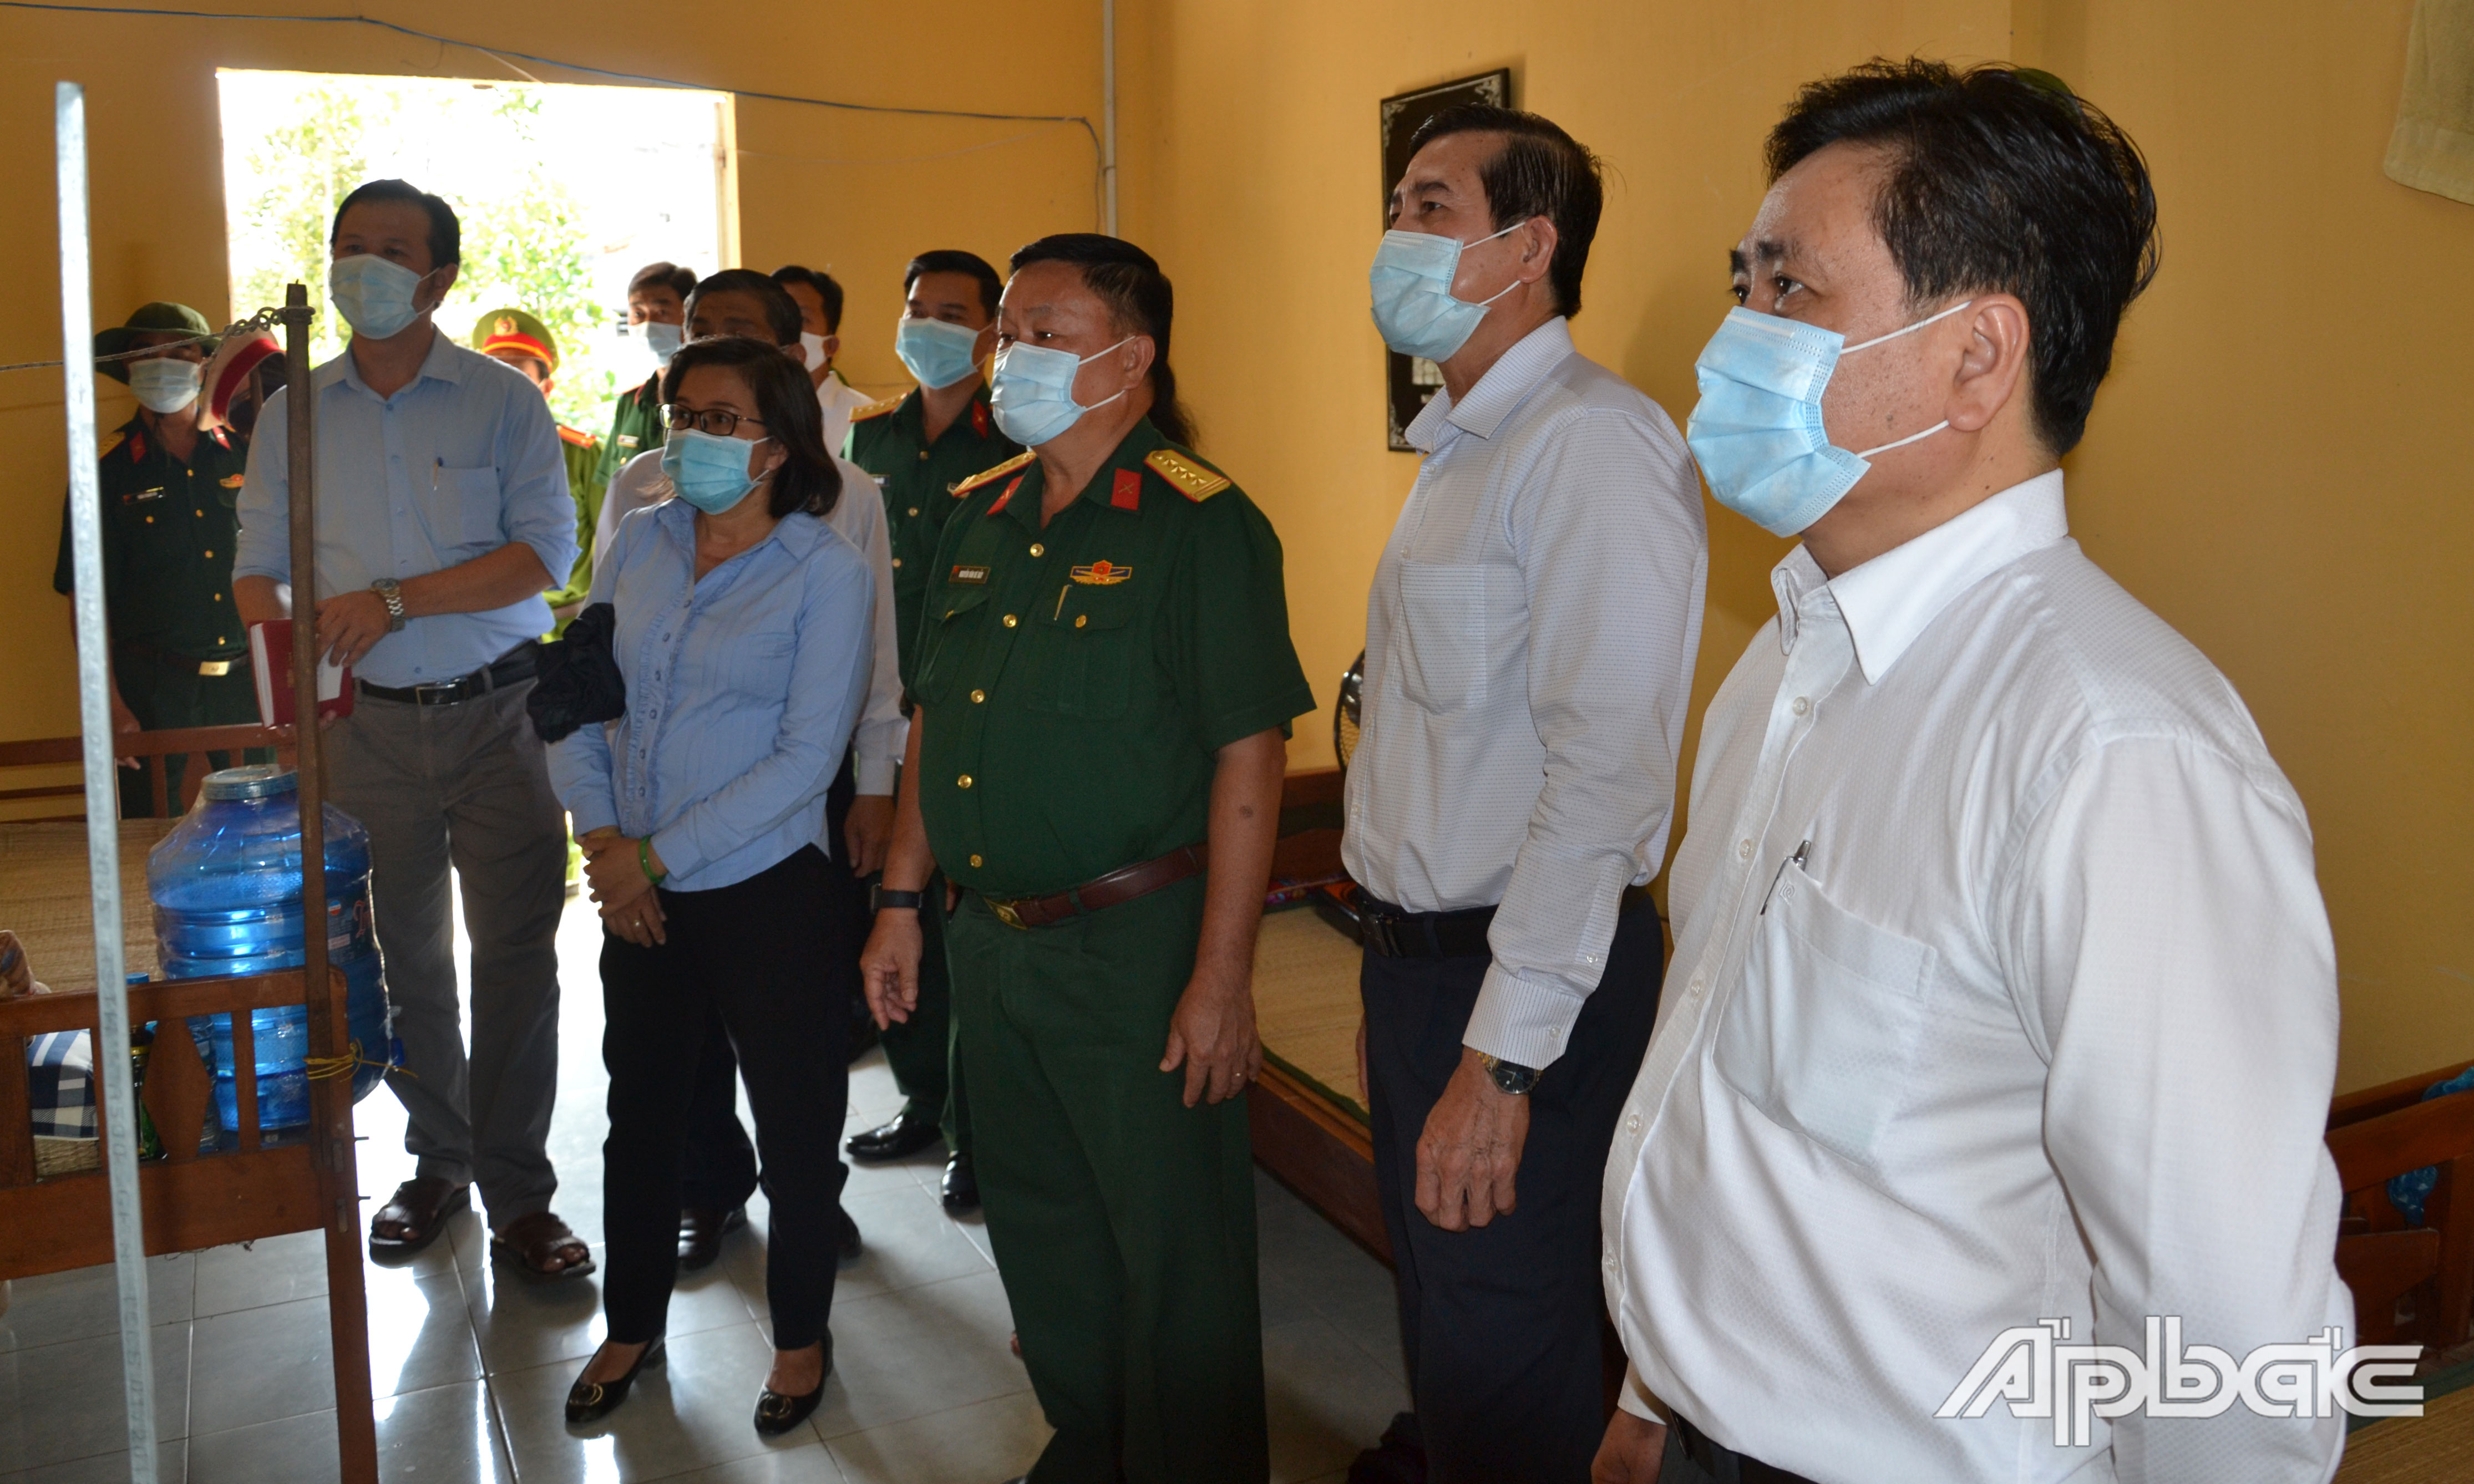 Provincial leaders inspected the isolation of citizens returning home at the local Military School.